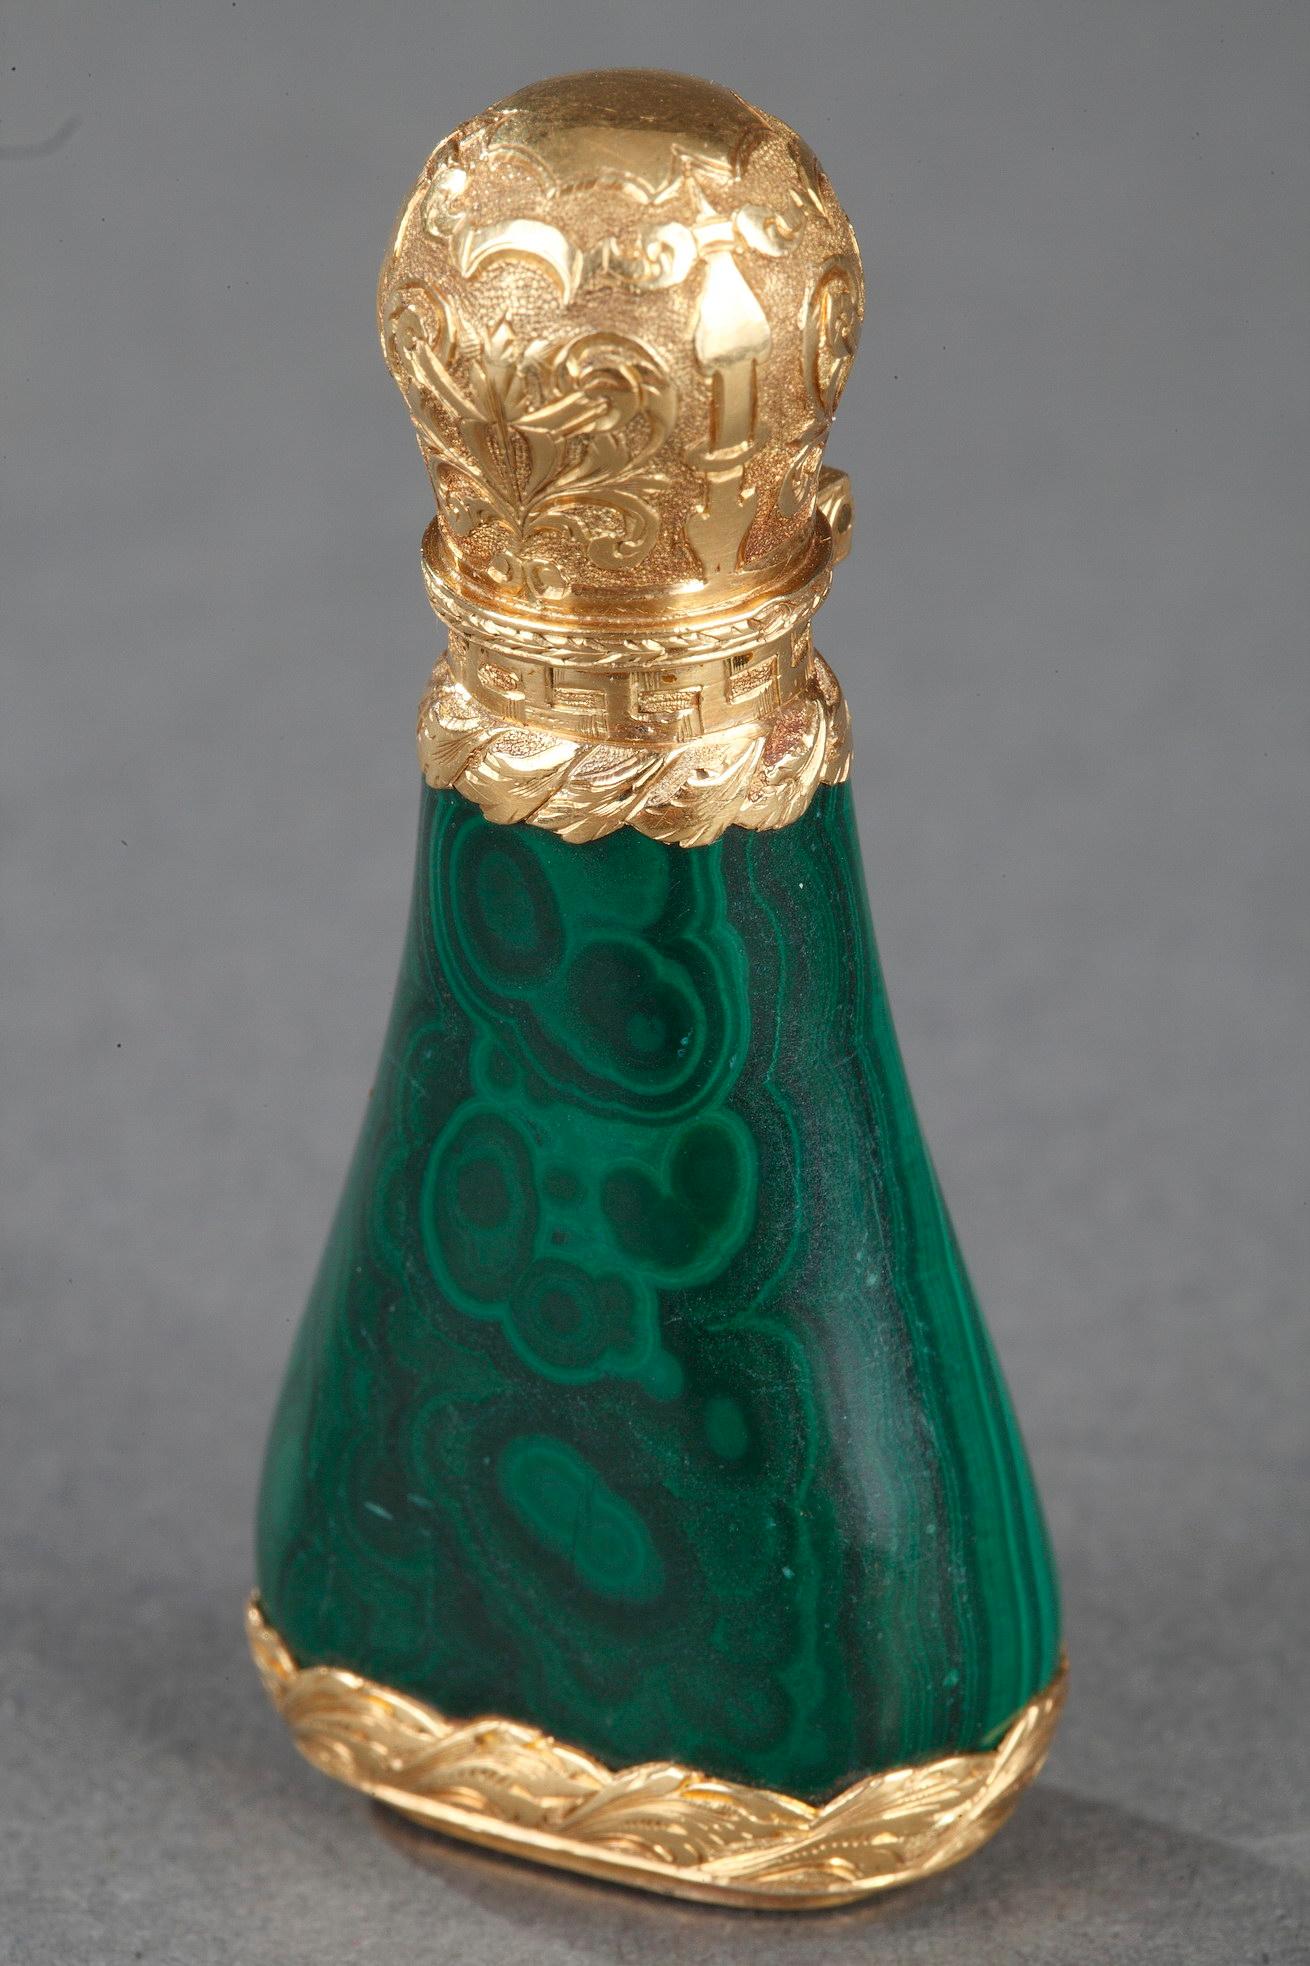 Piriform malachite flask set in a gold frame finely chiseled with floral motifs and interlace on amati gold background. The hinged cap opens on a gold cap. The gold frame of this bottle affixes a seal.

H: 1.77 in. (4,5 cm) / l: 0.78 in. (2 cm)

18k